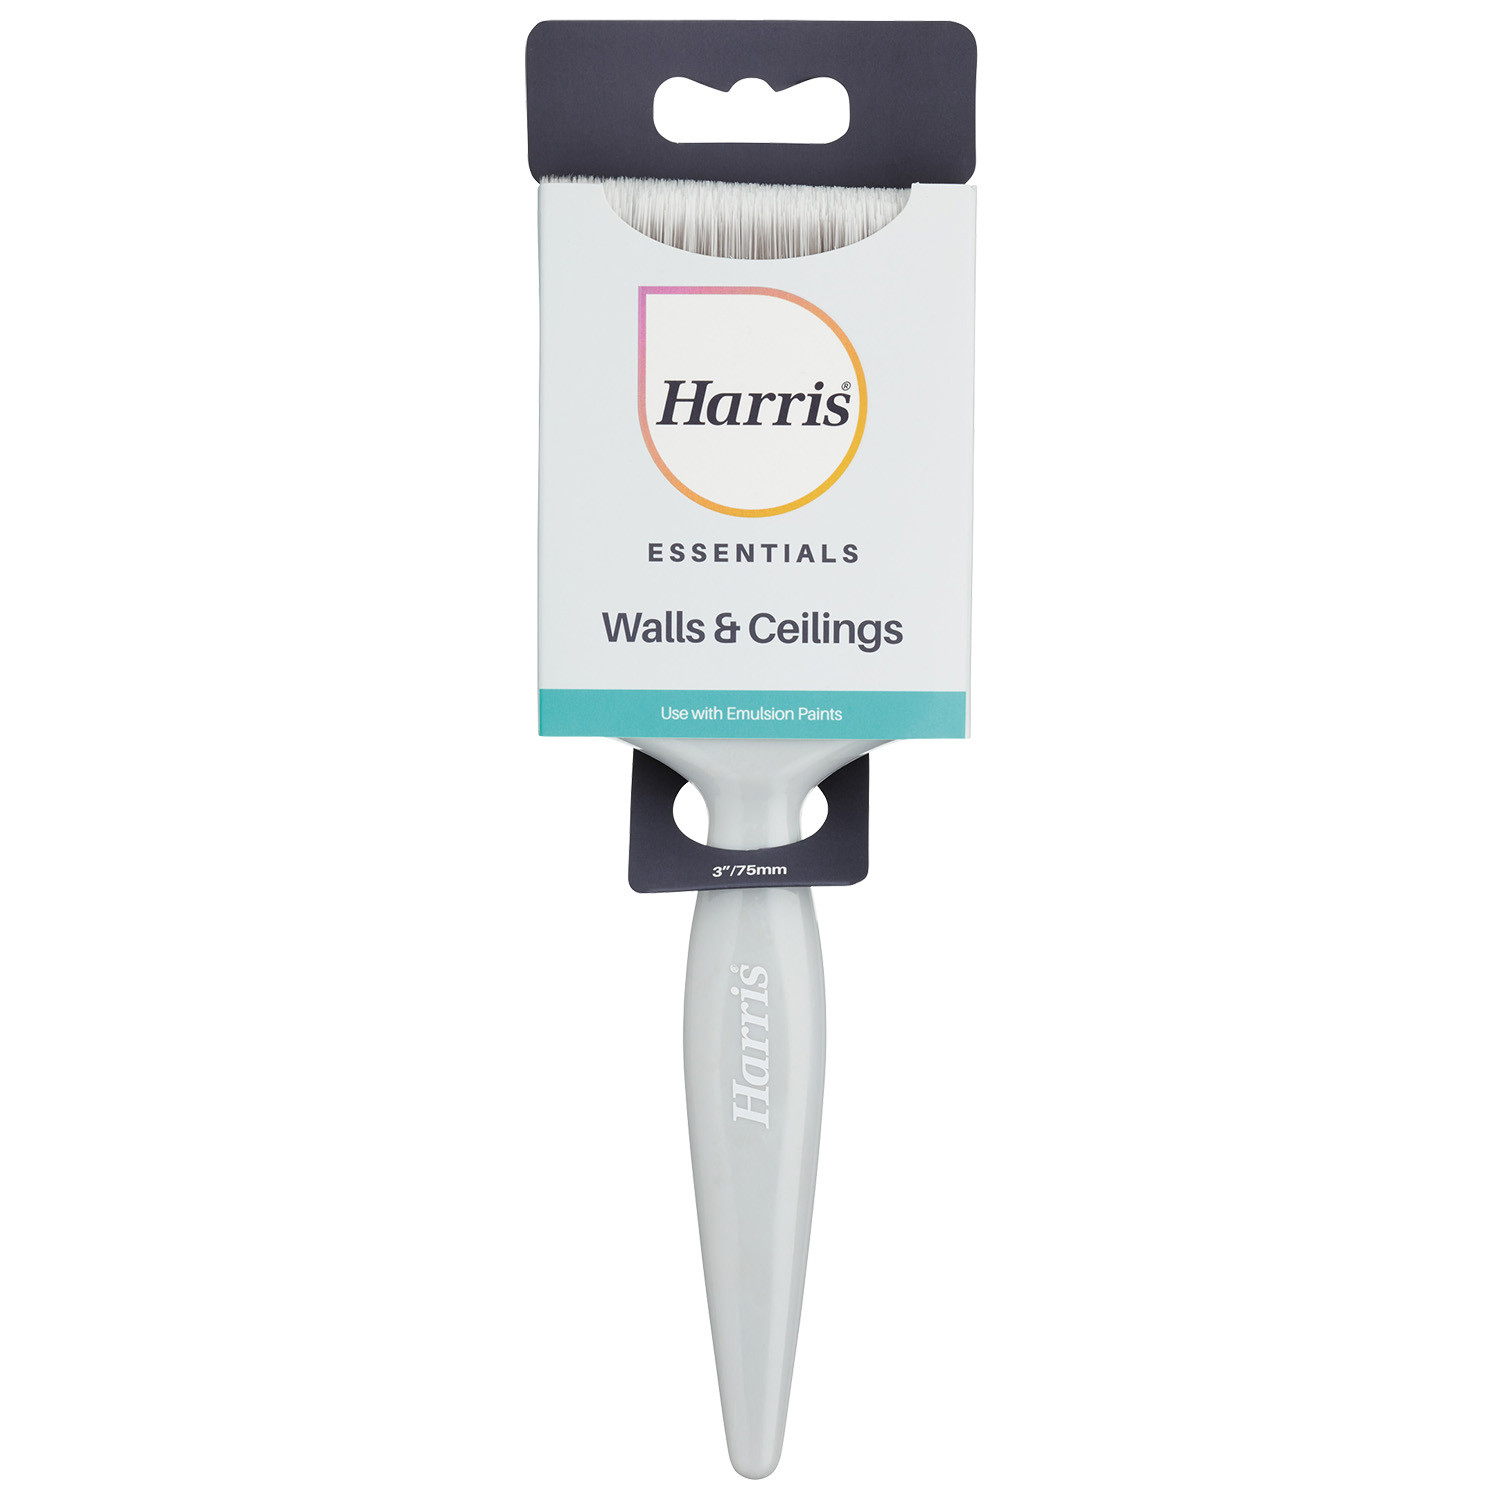 Harris 3 inch Essentials Walls and Ceilings Paint Brush Image 1